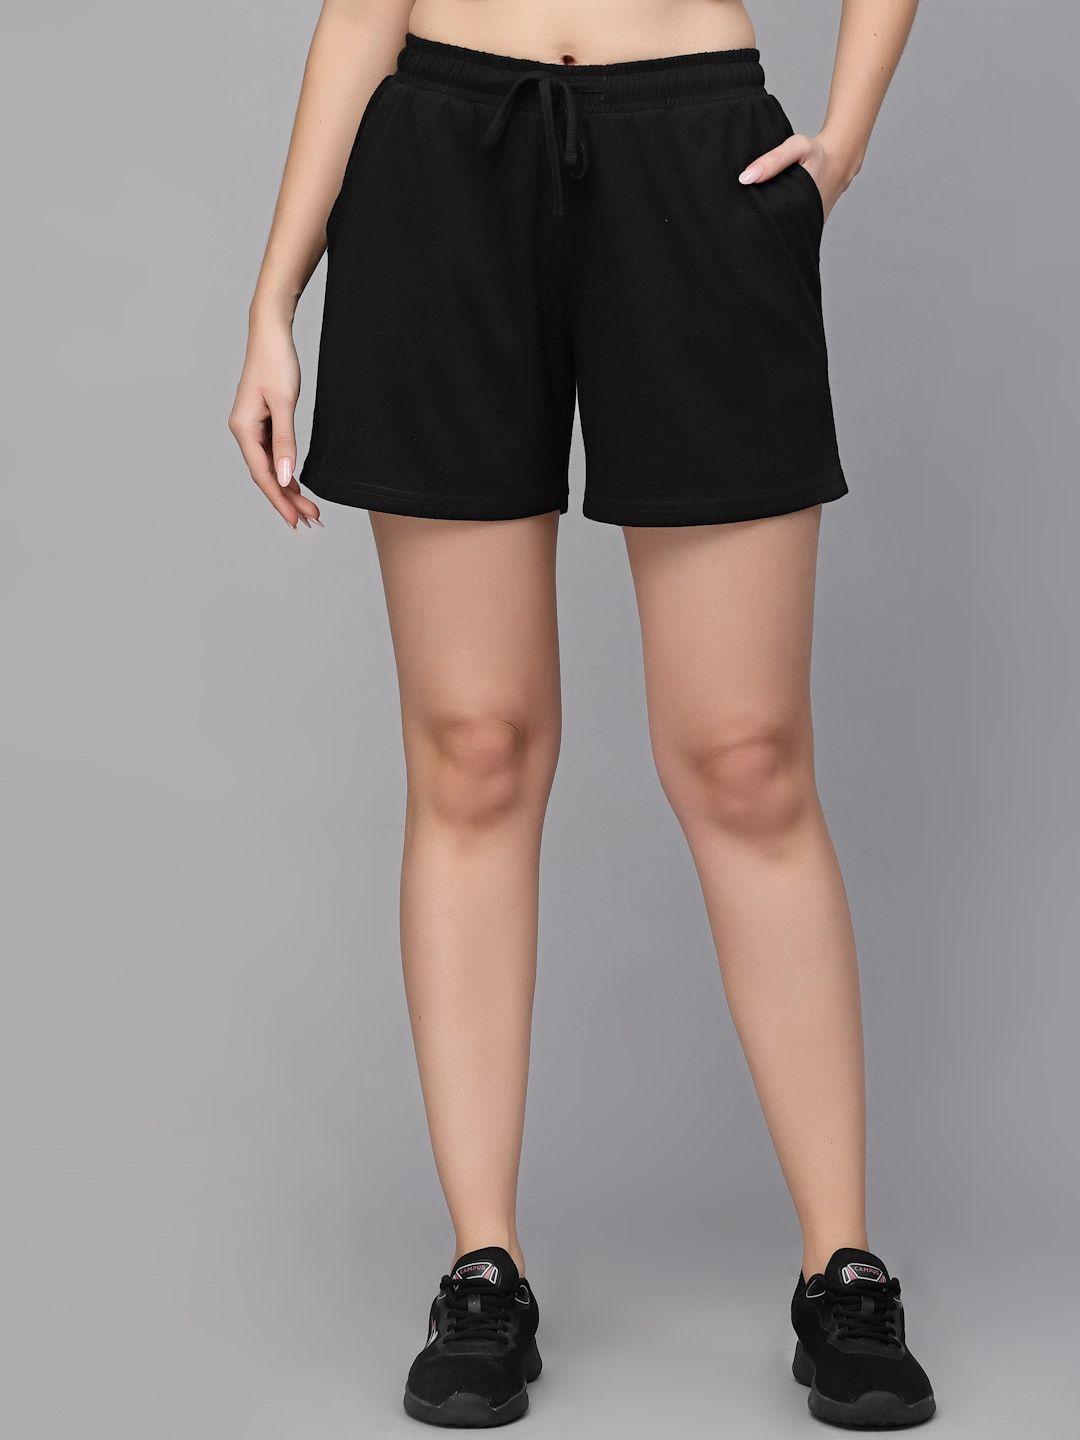 strong and brave women odour free cotton mid-rise sports shorts